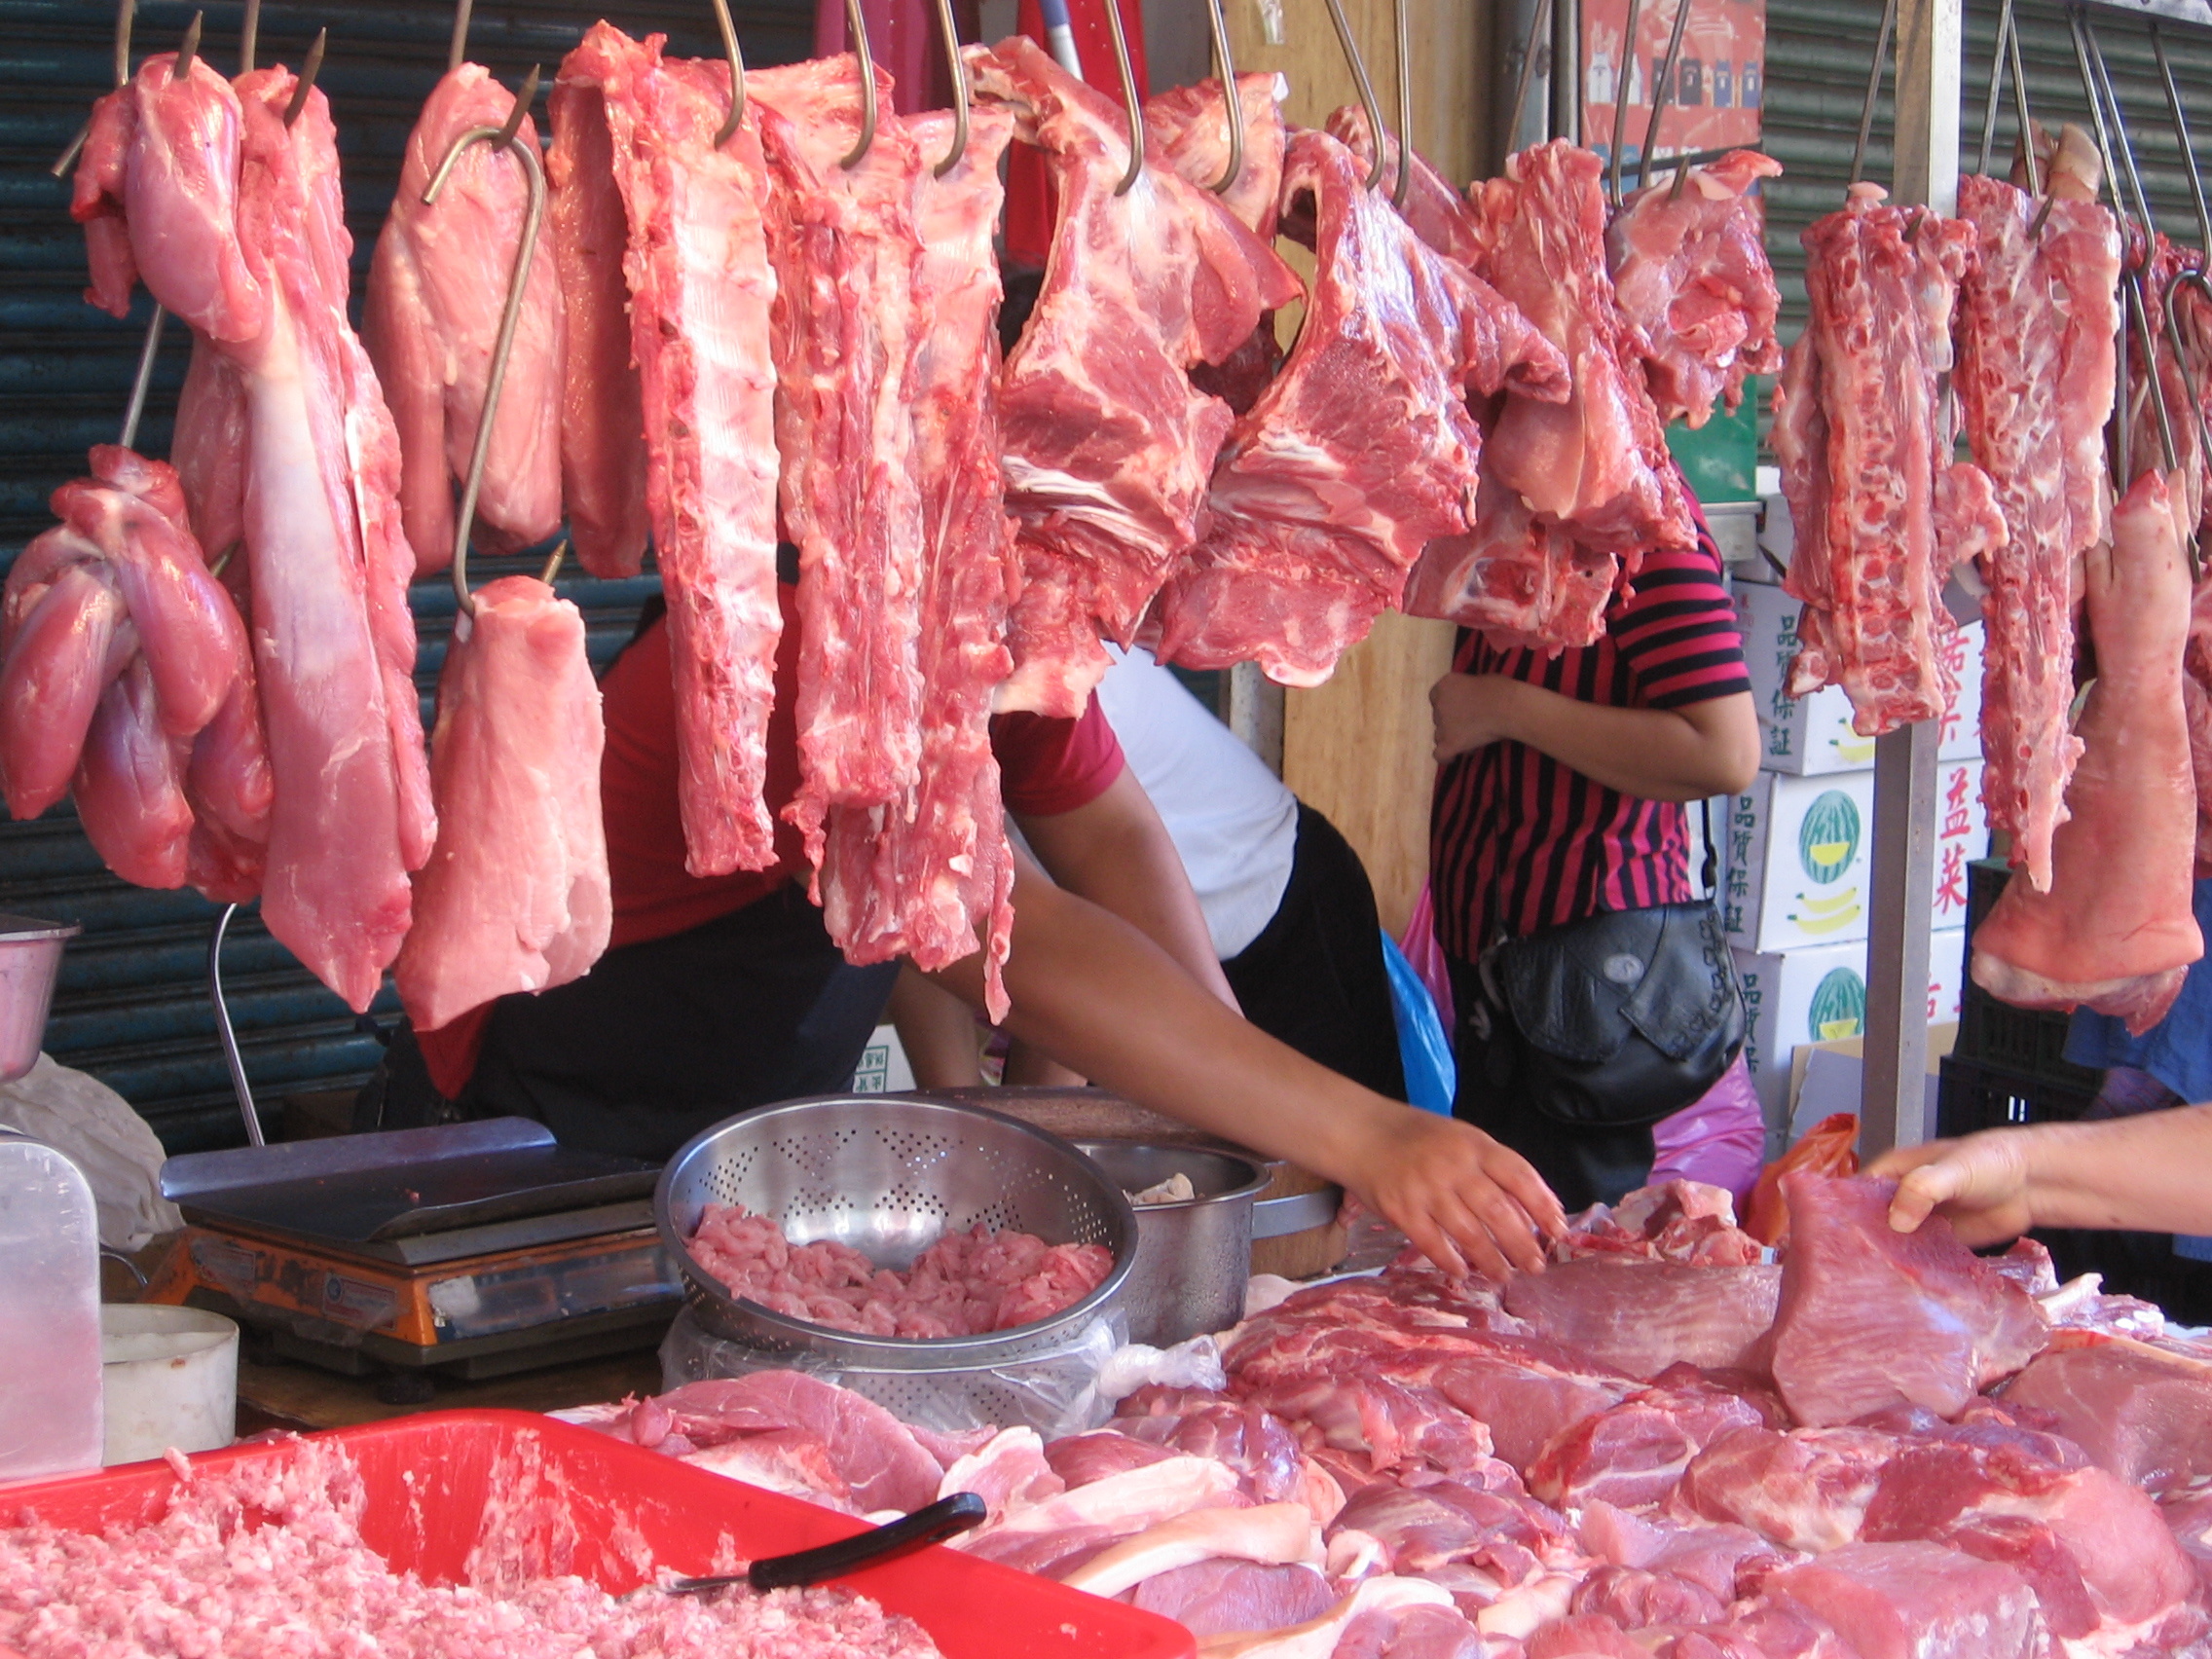 Pork stall at a wet market in Asia